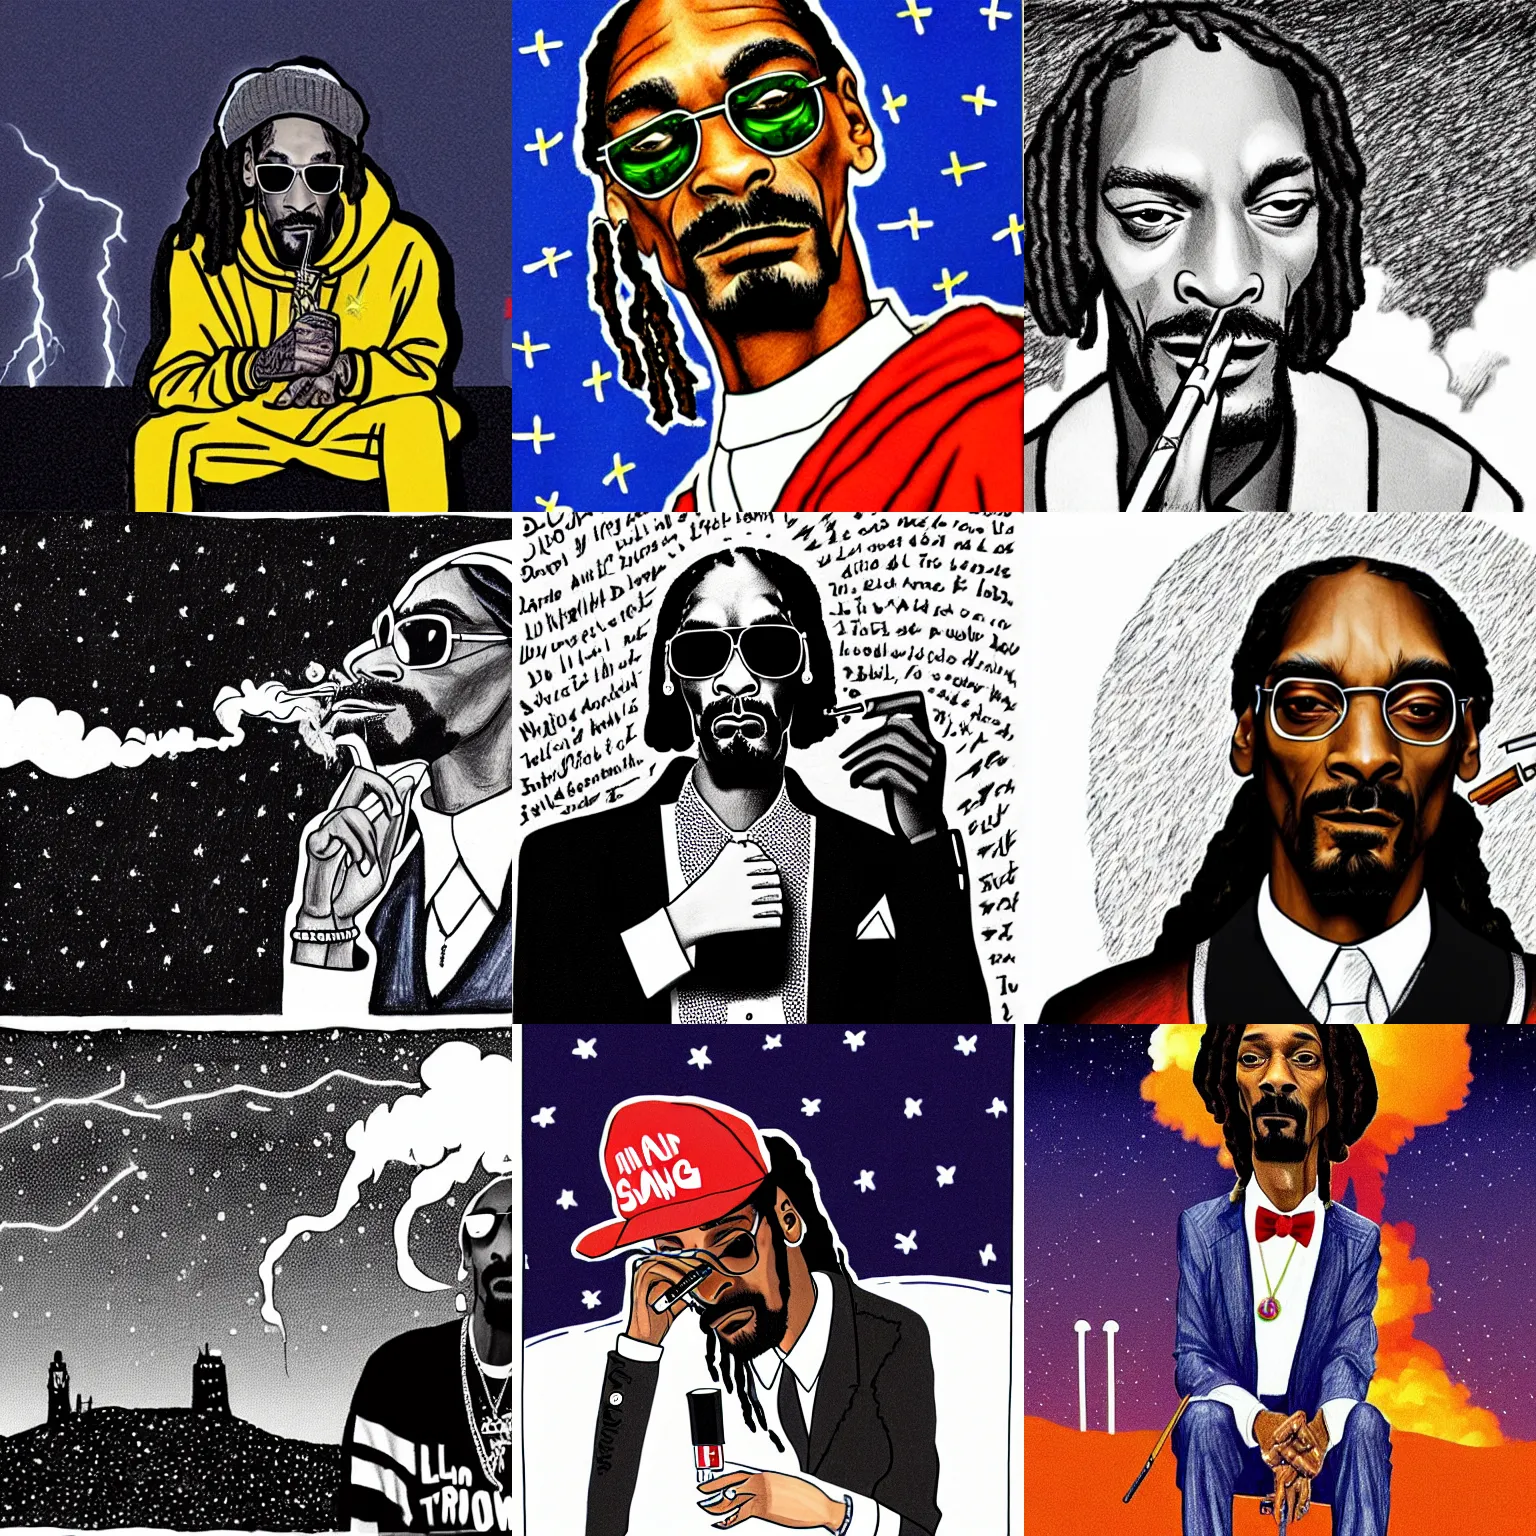 Prompt: a hand drawn image of snoop dogg smoking a joint with donald trump, sitting on top of a large black tower during a cold winter night, lightning in the background